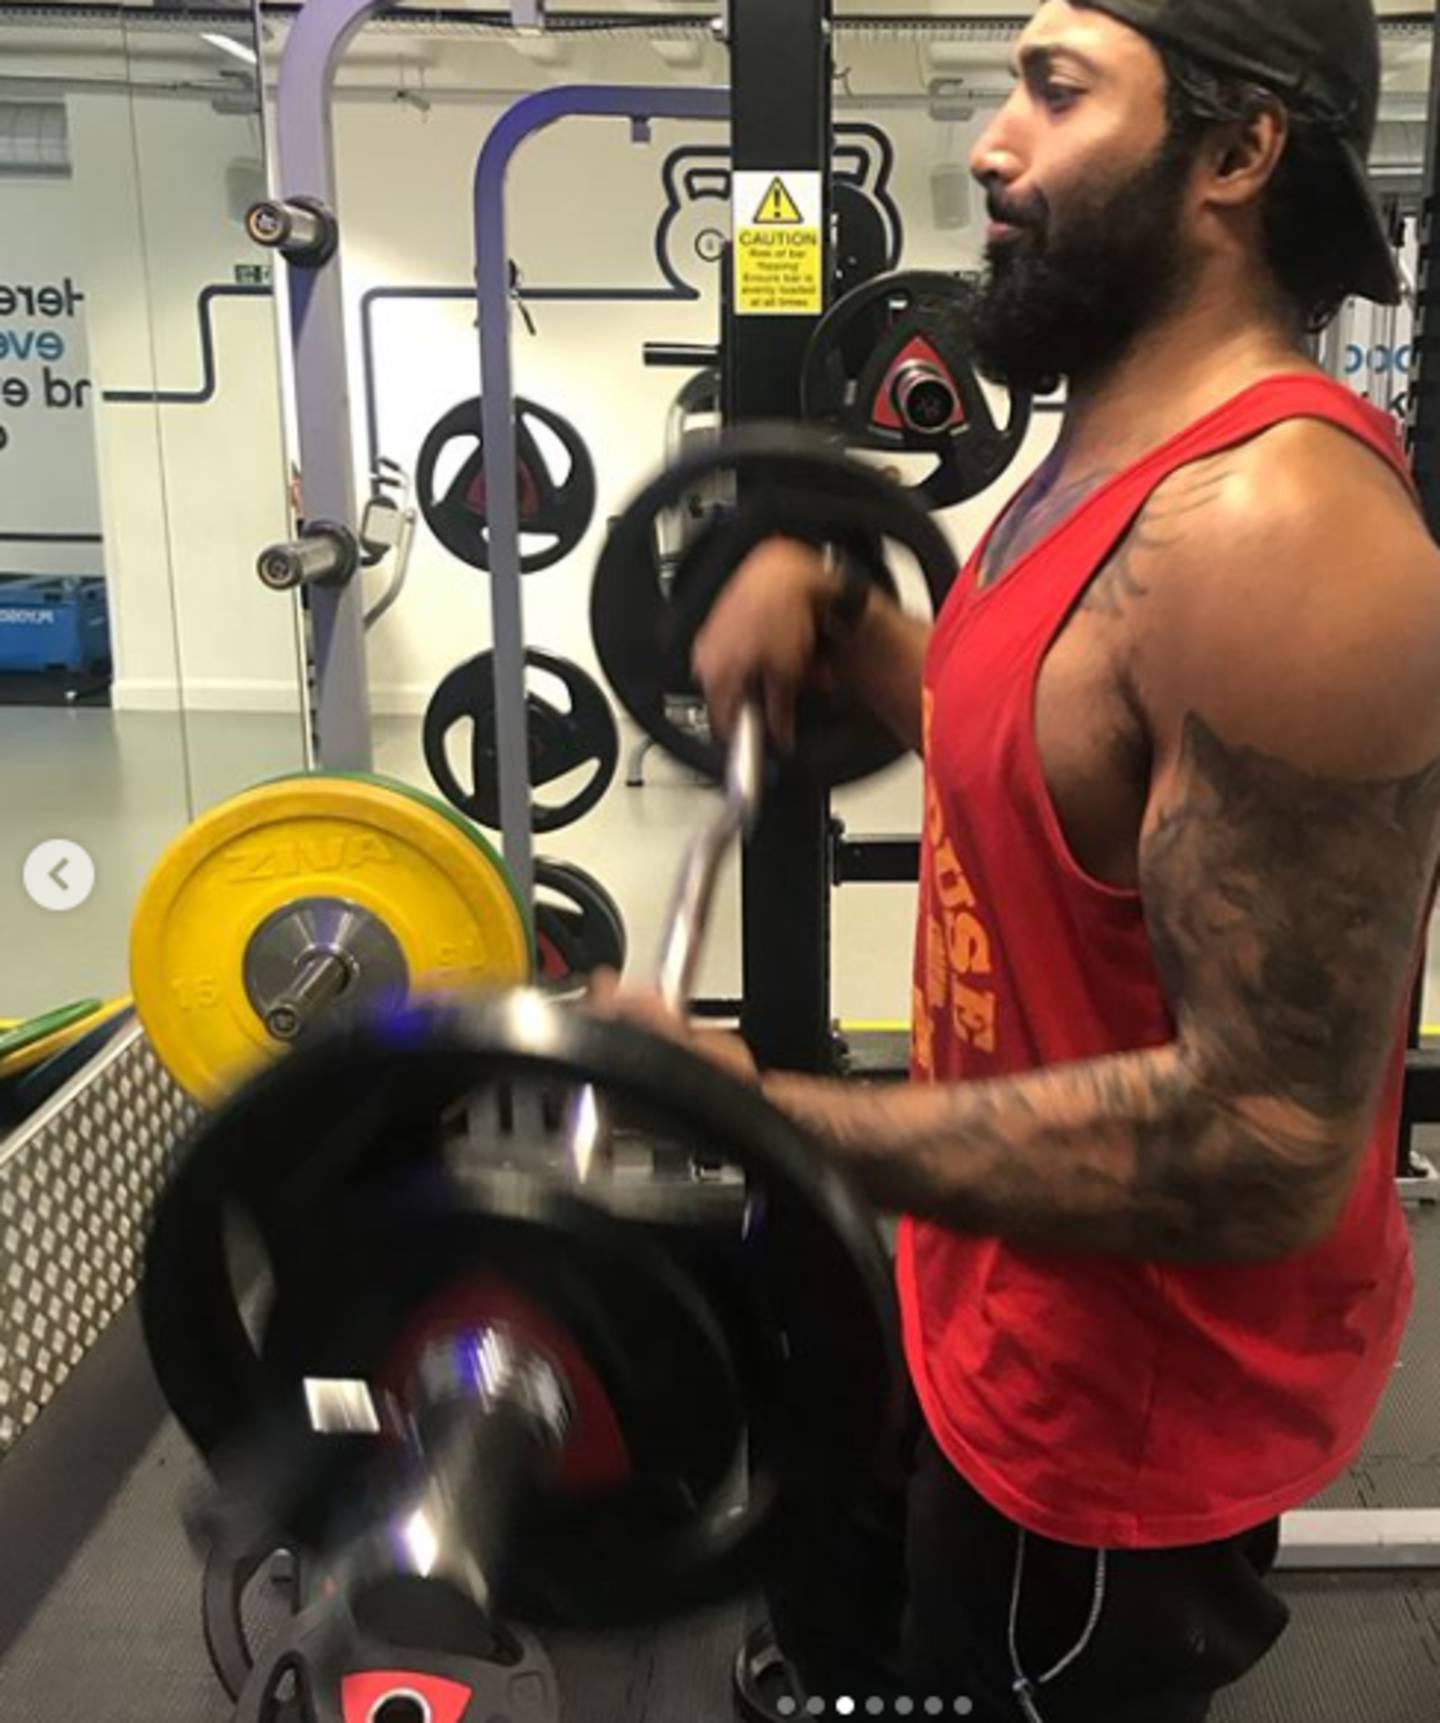 Shiraz doing bicep curls with barbell in the gym
